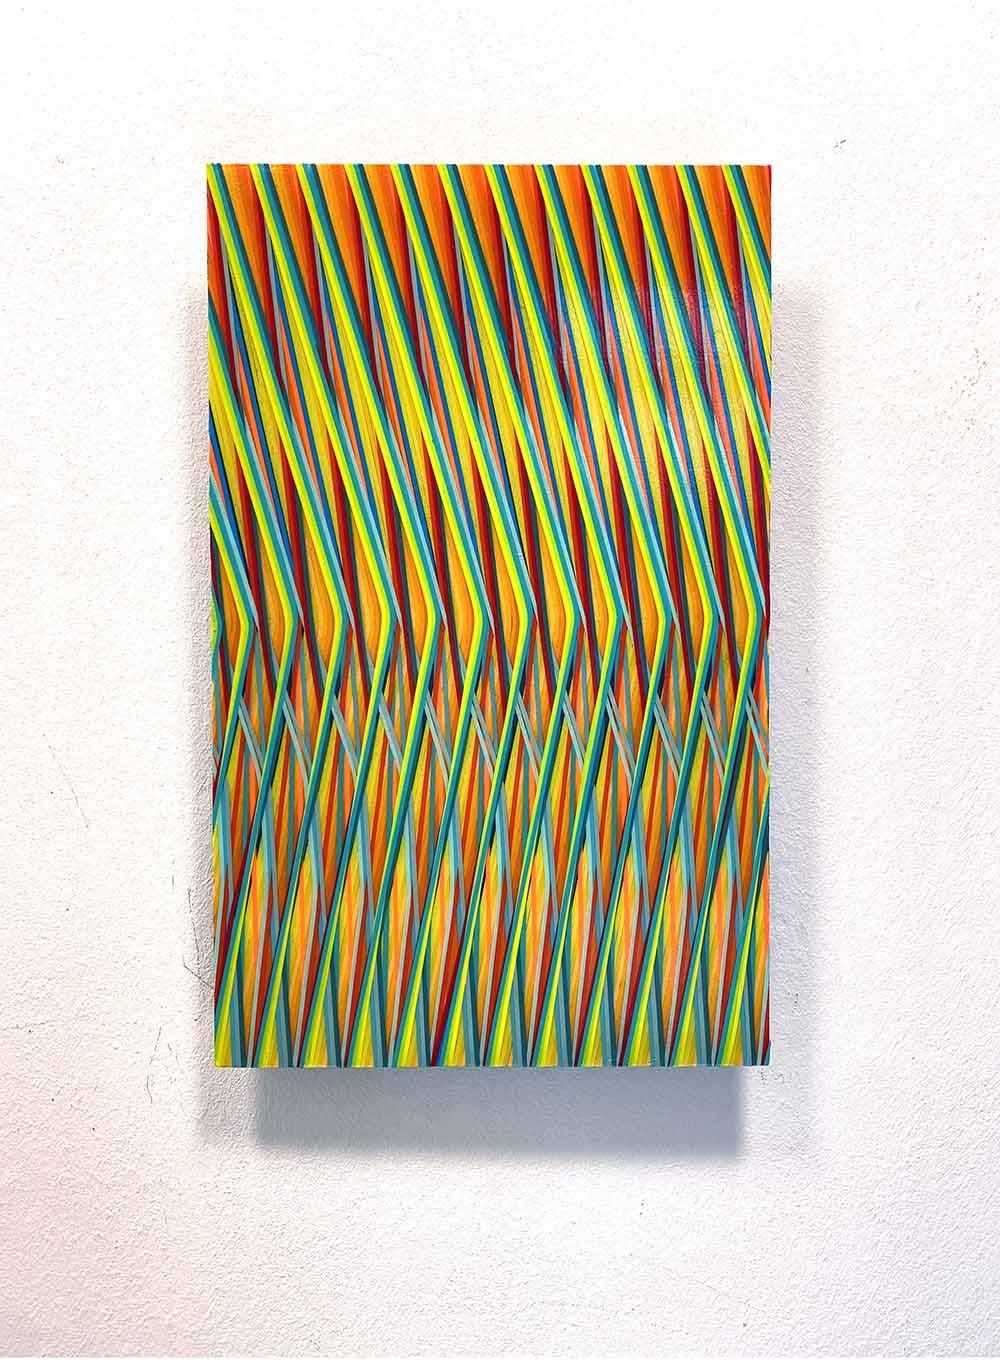 Line 1222-02 is a unique painting by contemporary artist Ahn Hyun-Ju. The painting is made with Polyester, pigments and acrylic on aluminium, dimensions are 50 × 30 cm (19.7 × 11.8 in). 
The artwork is signed, sold unframed and comes with a